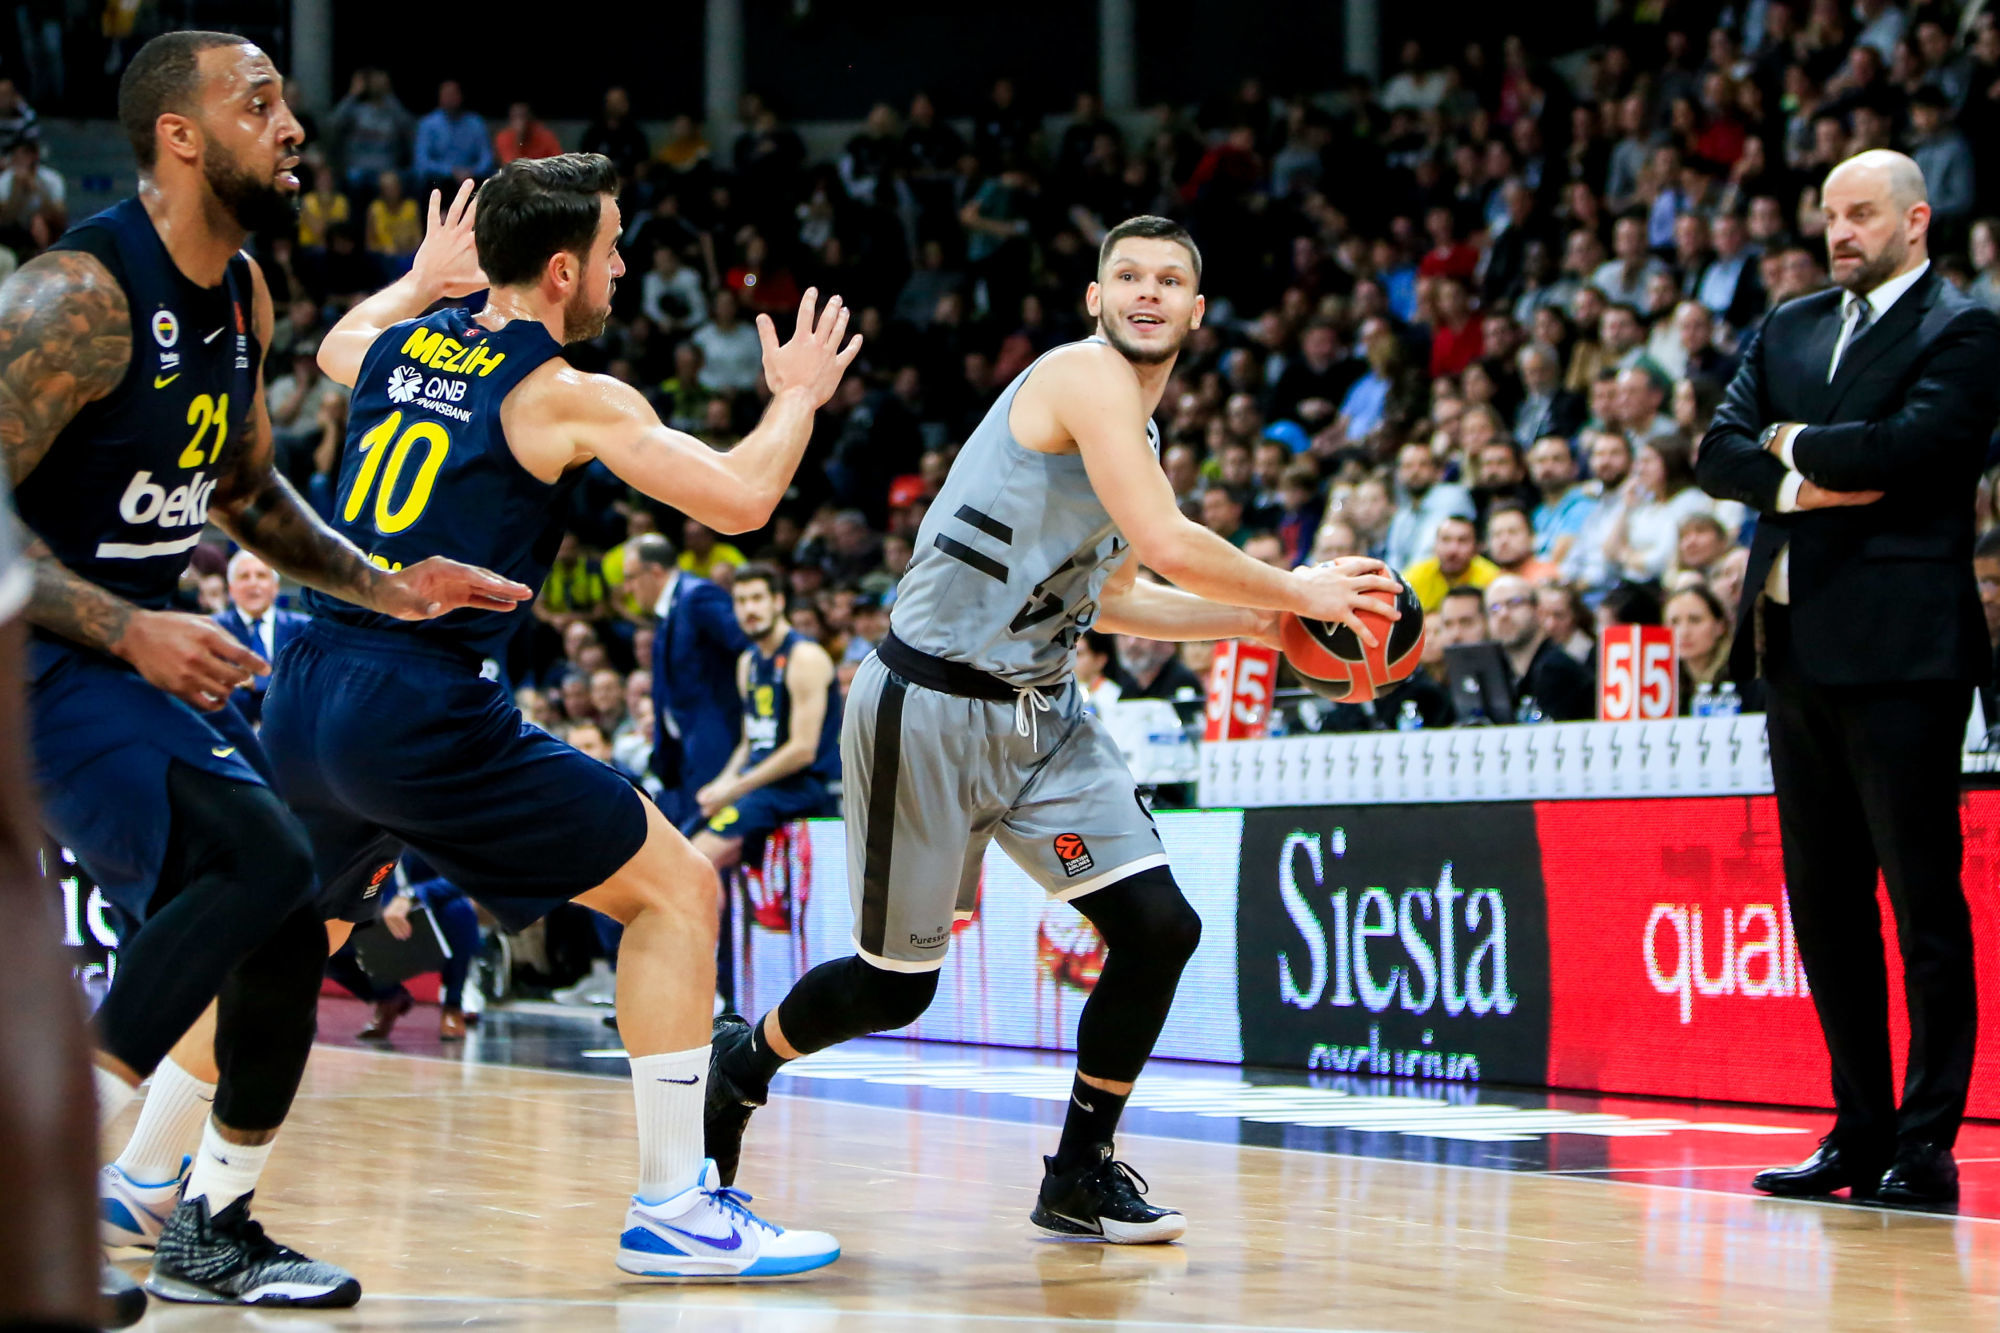 Melih MAGMUTOGLU of Fenerbahce and Rihards LOMAZS of Lyon during the Euroleague match between ASVEL and Fenerbahce on November 22, 2019 in Villeurbanne, France. (Photo by Romain Biard/Icon Sport) - Astroballe - Villeurbanne (France)